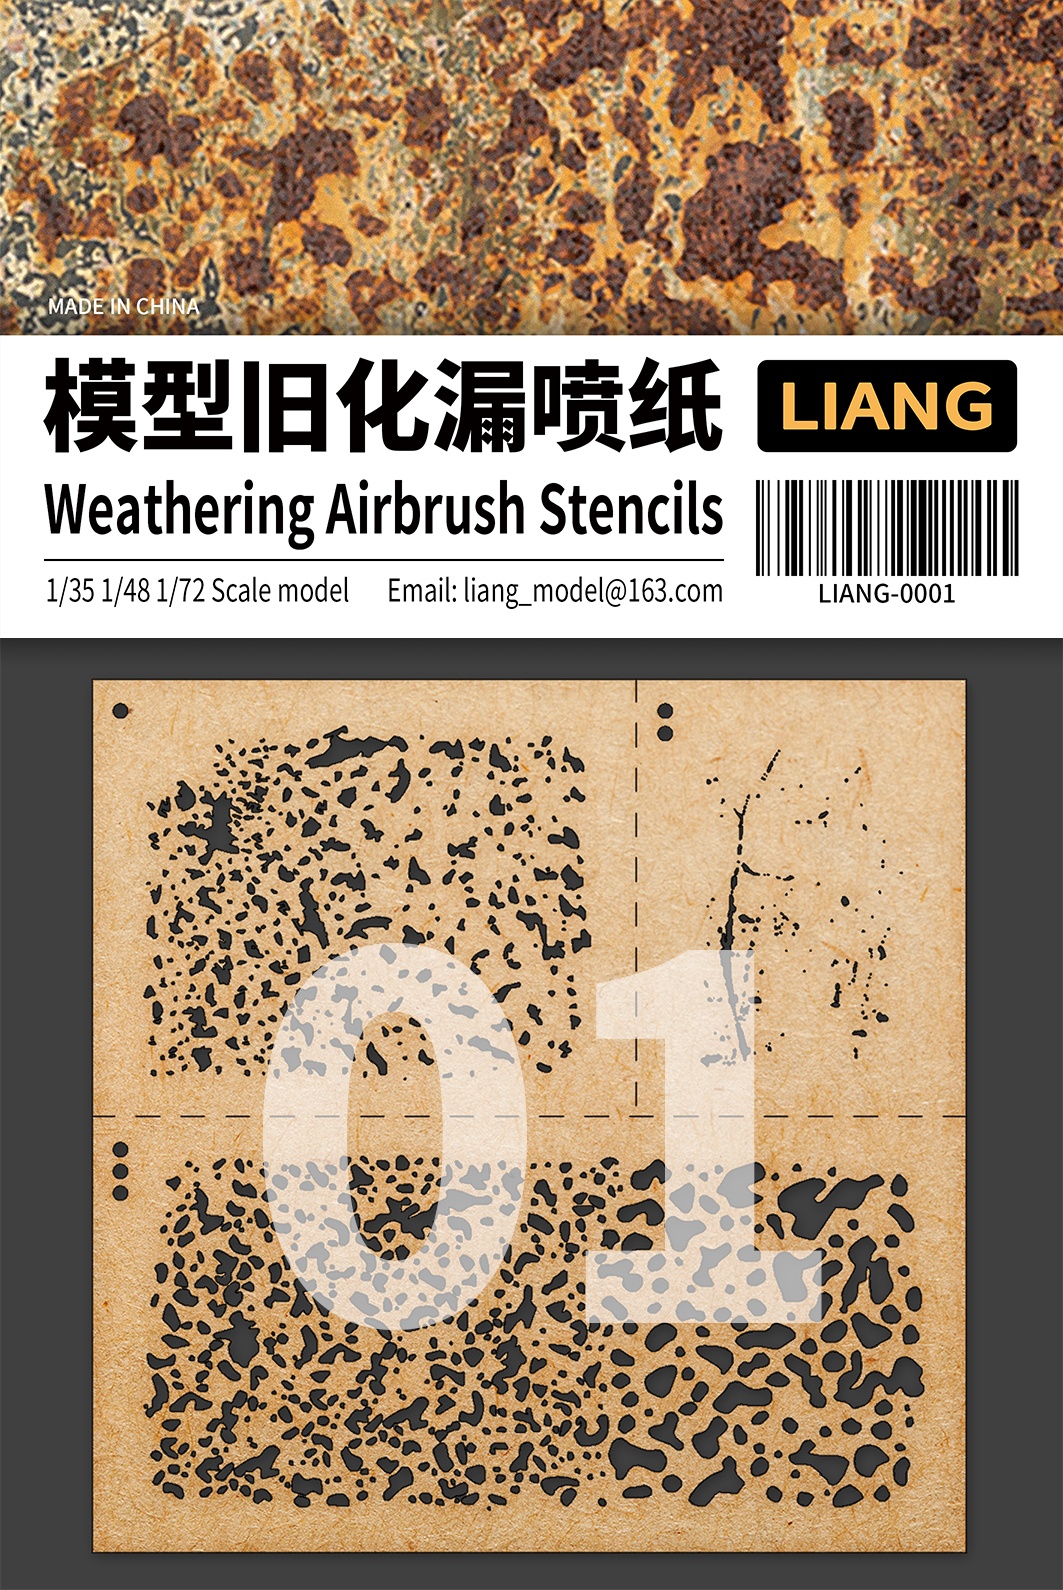 Weathering Stencil for Airbrush (1/35, 1/48, 1/72)